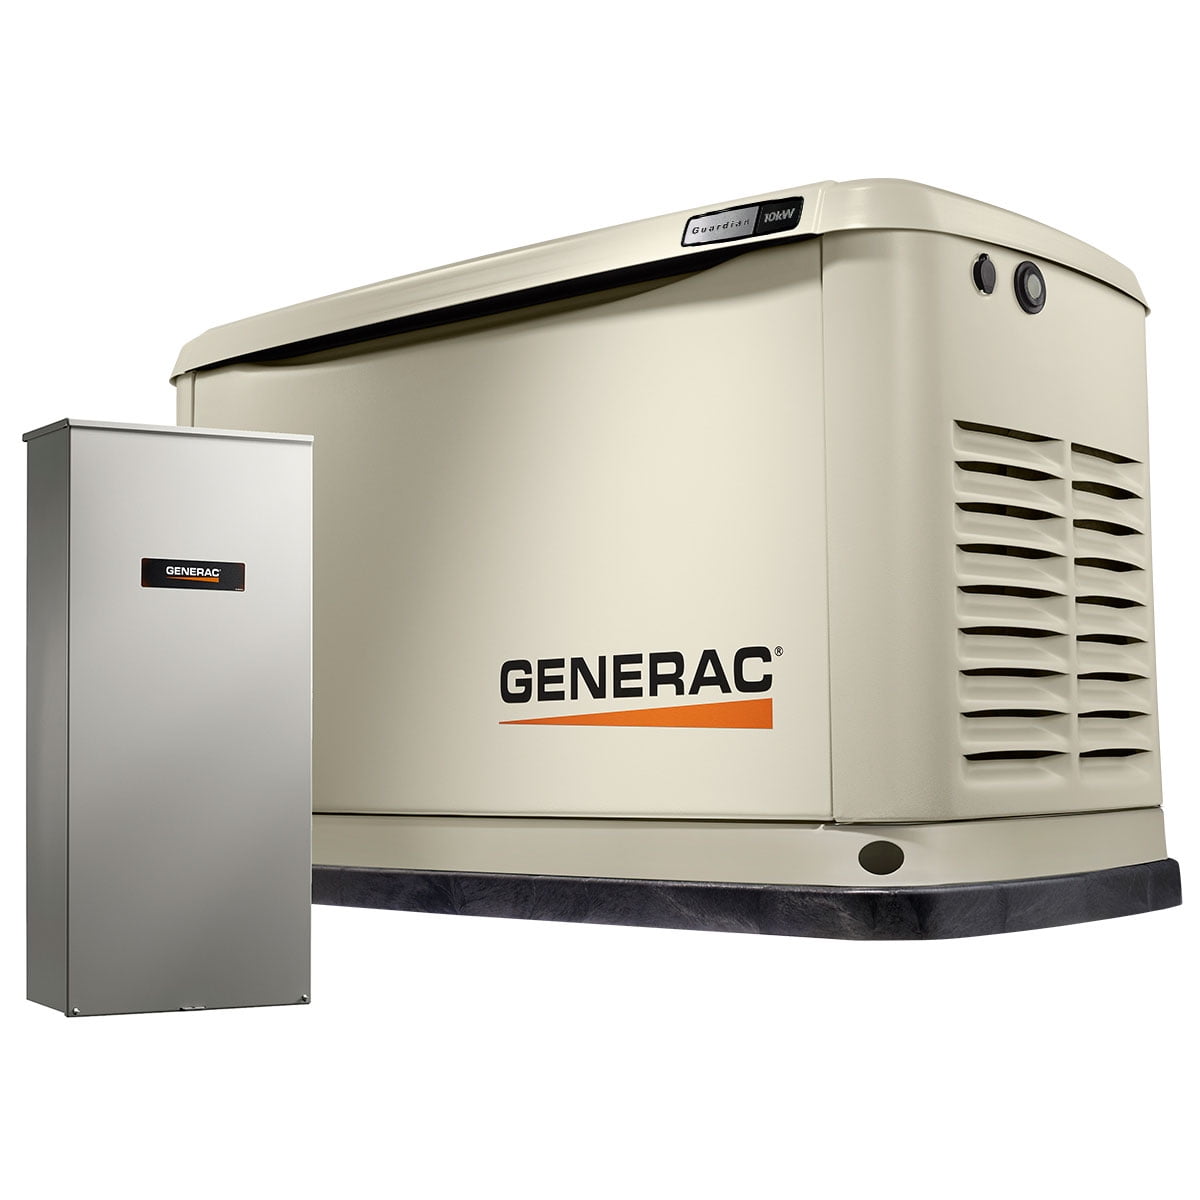 Generac 7043 Home Standby Generator 22kW/19.5kW Air Cooled with Whole House 200 Amp Transfer Switch Aluminum